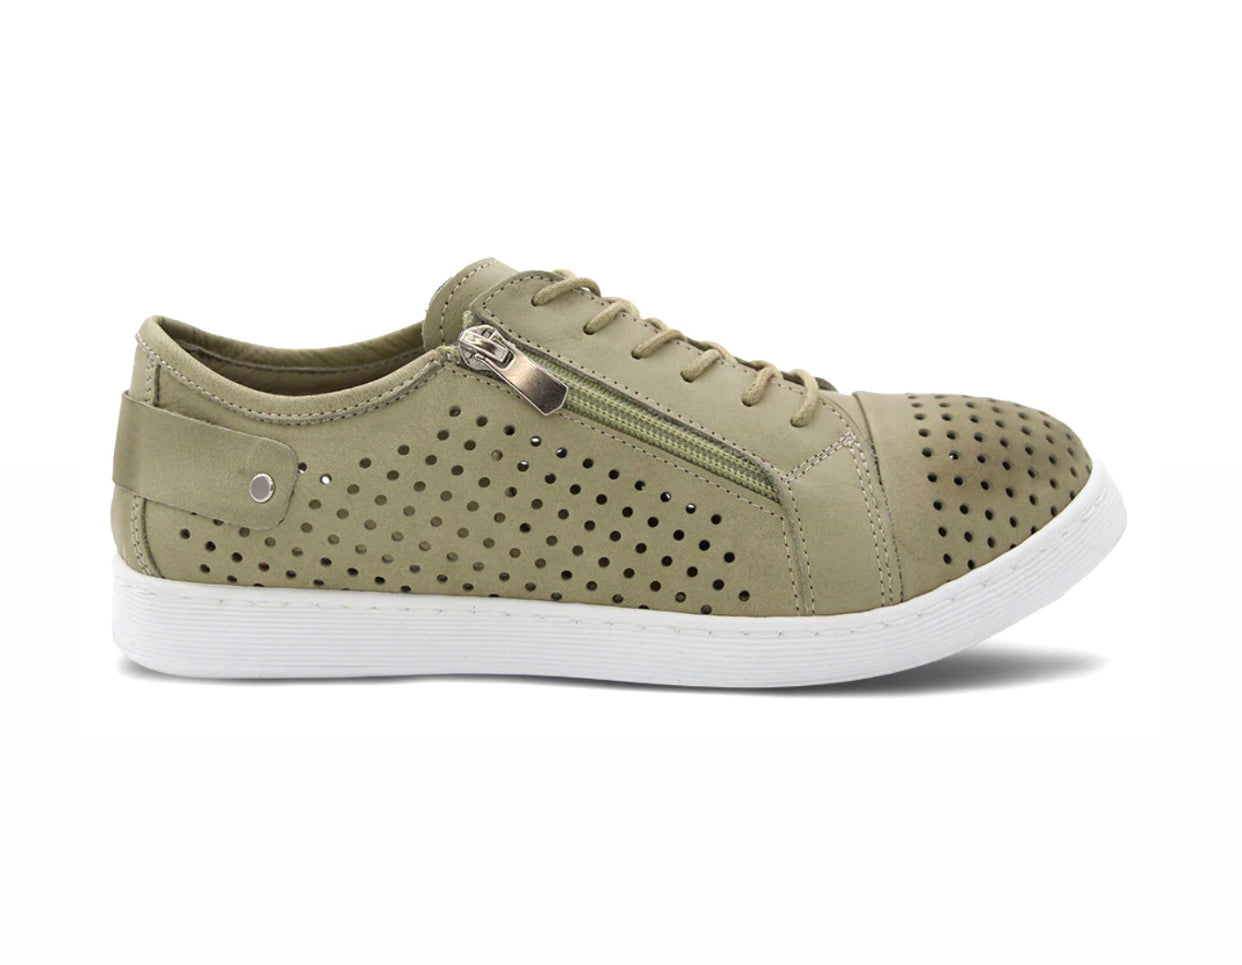 Cabello Comfort EG17 Pistachio Green Perforated 6 Eyelet Zip Shoe Made In Turkey